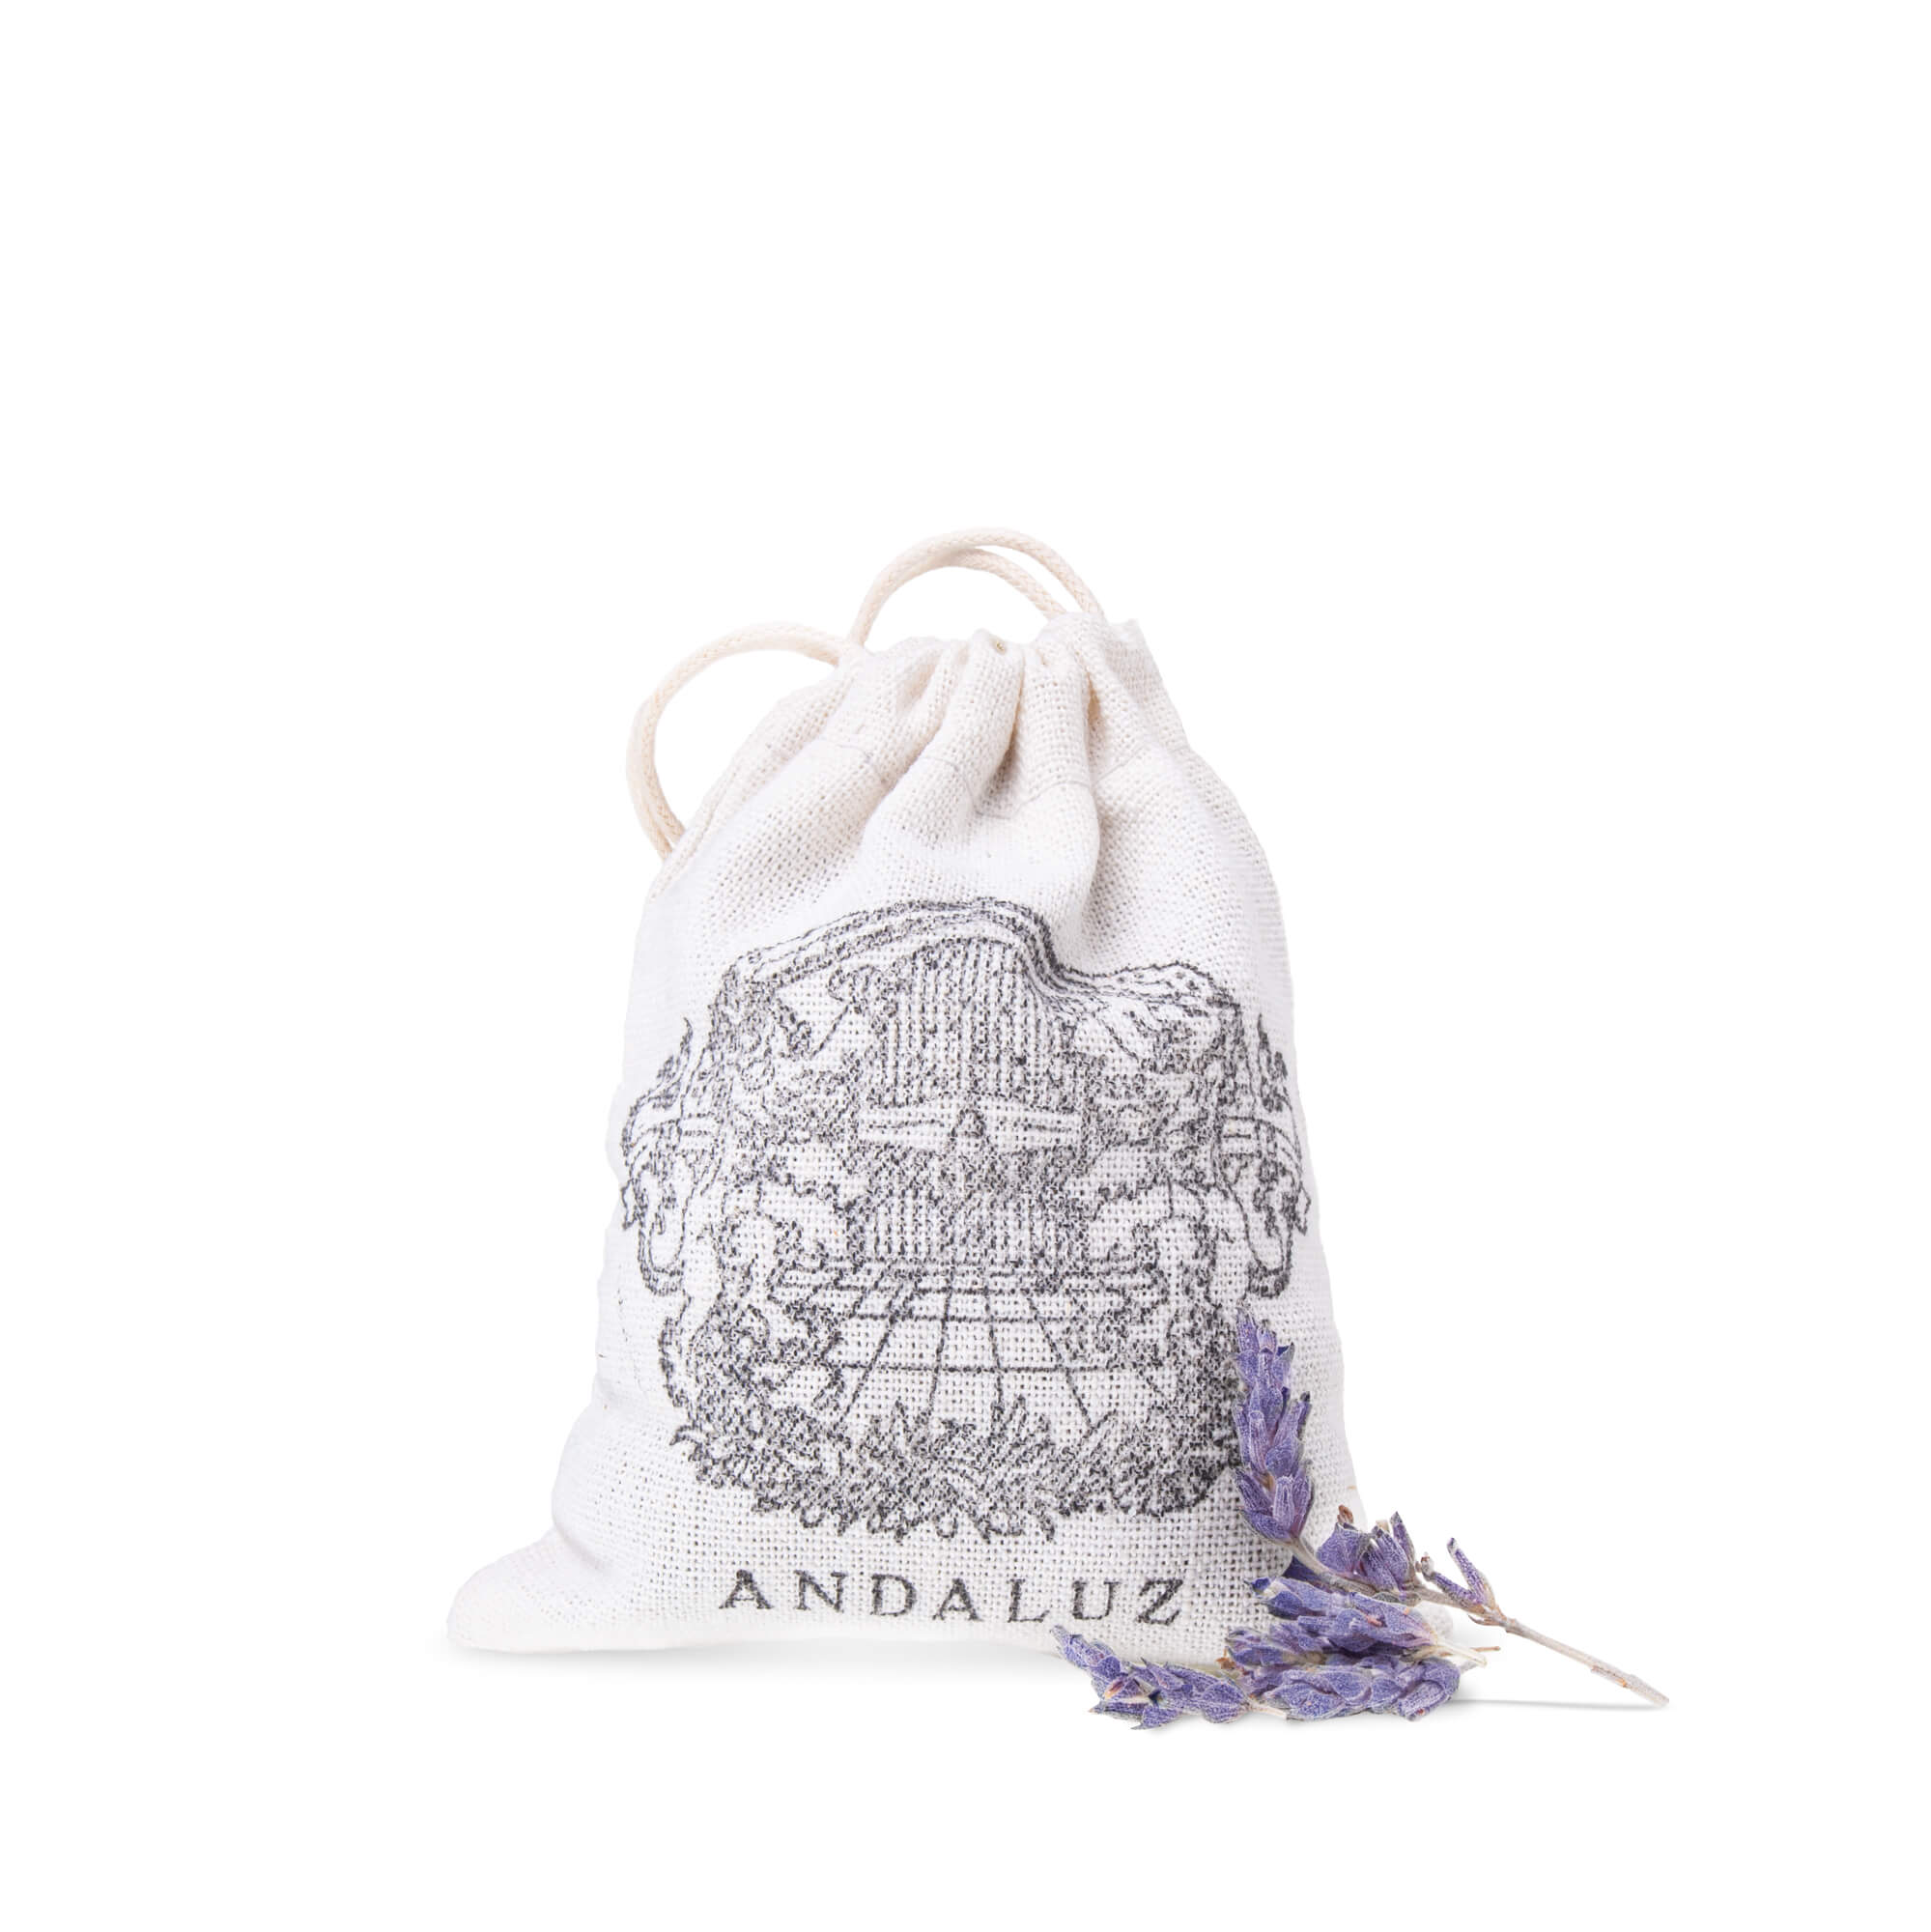 andaluz skincare lavender sachet. white cotton sachet bag with pull string imprinted with andaluz logo. filled with organic, hand grown lavender from andalusia, spain